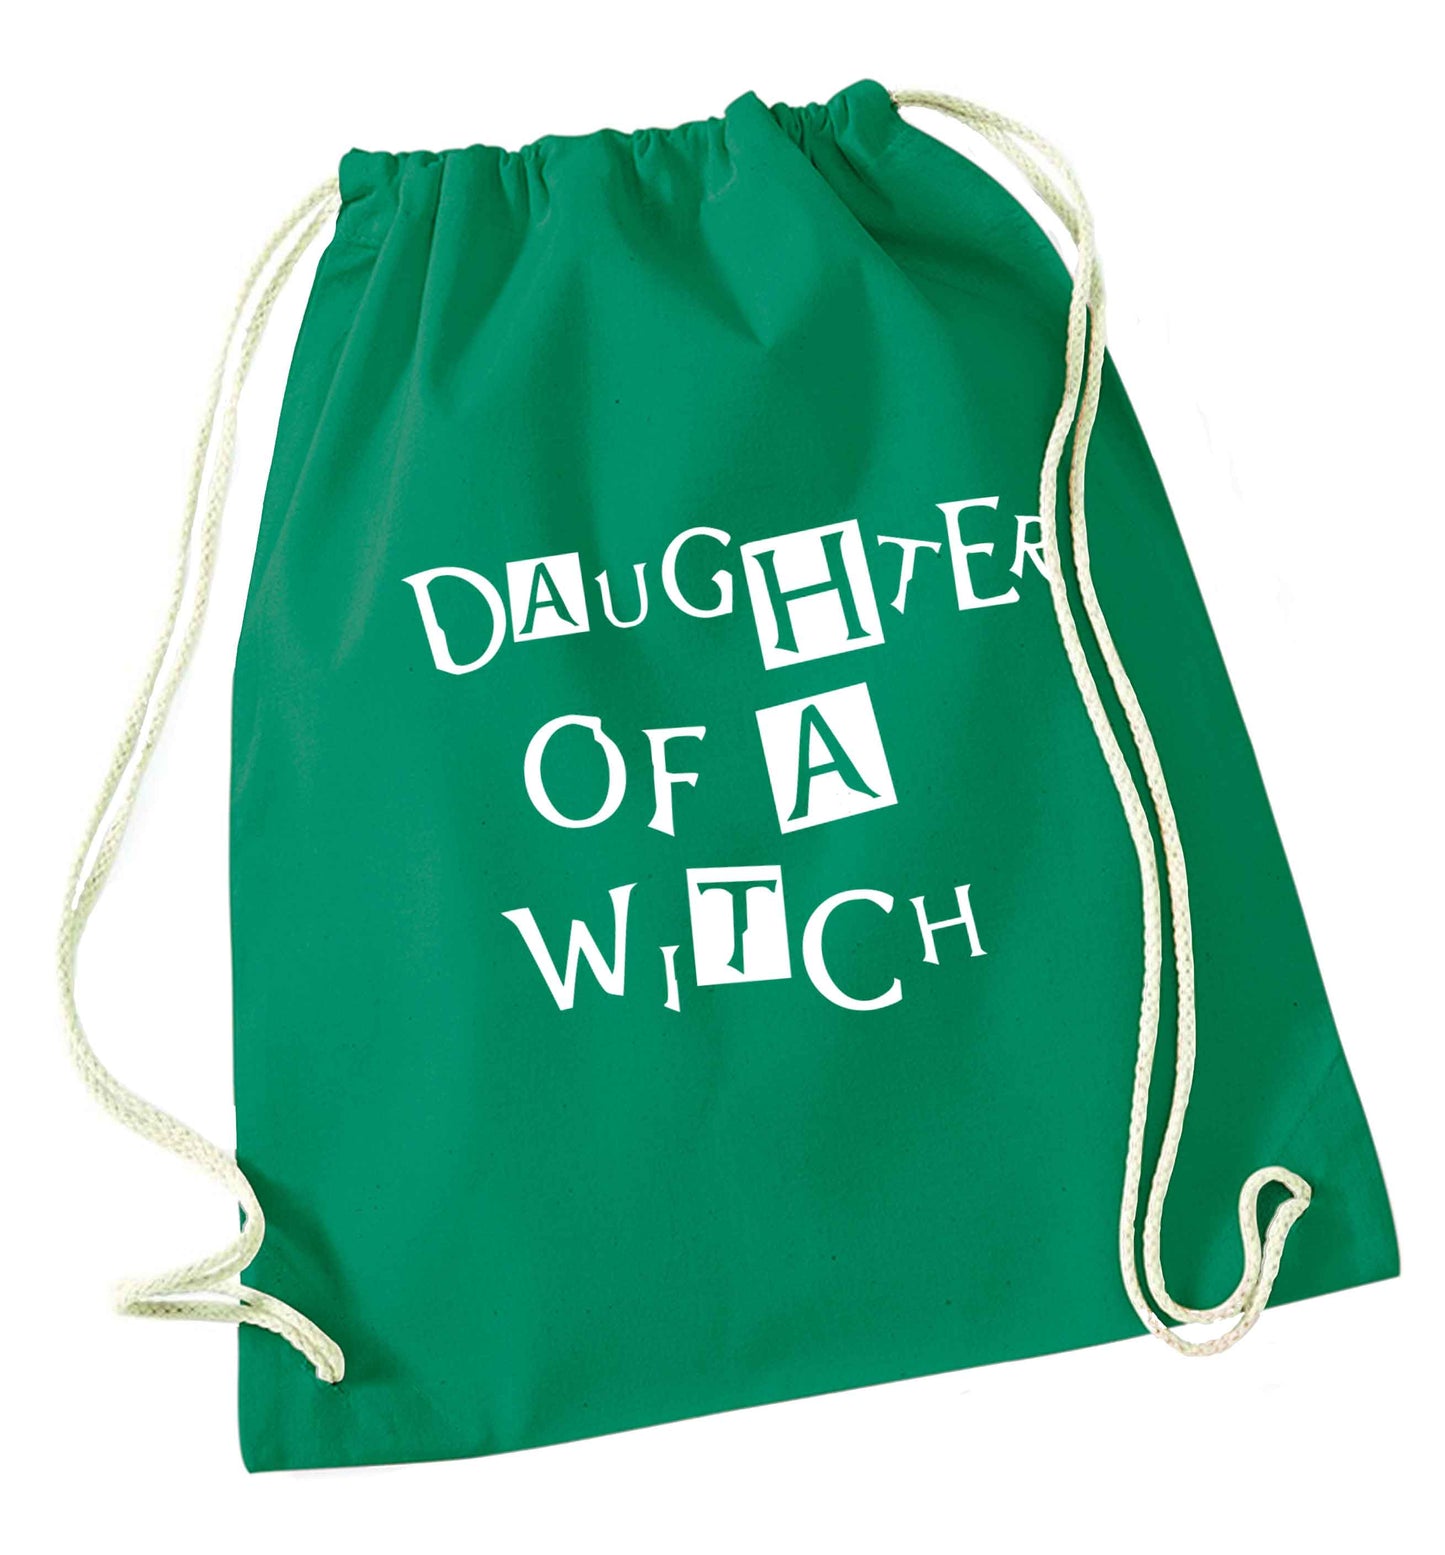 Daughter of a witch green drawstring bag